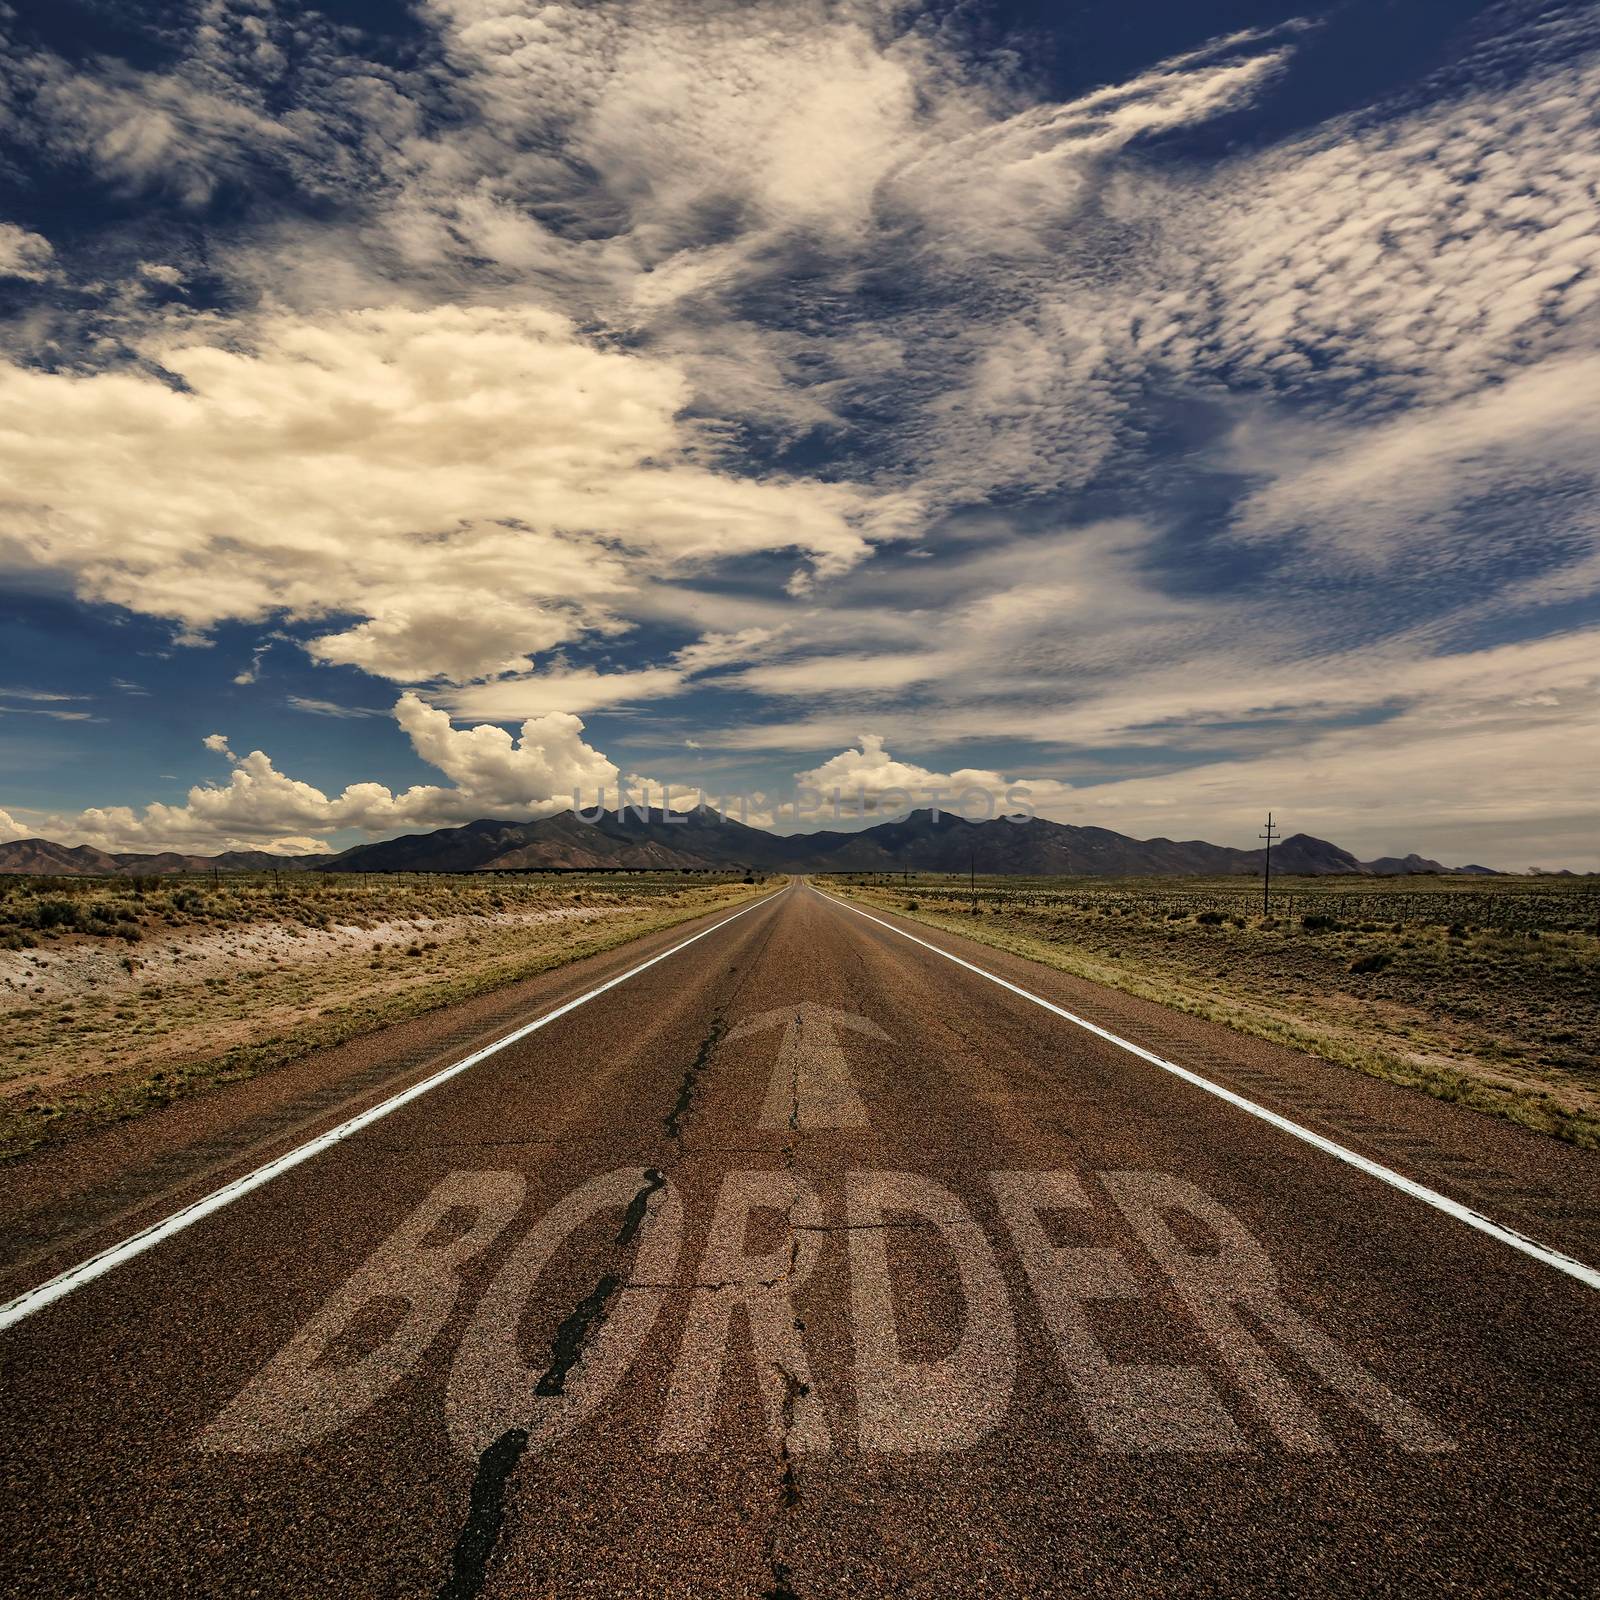 Conceptual image of desert road with the word border and arrow